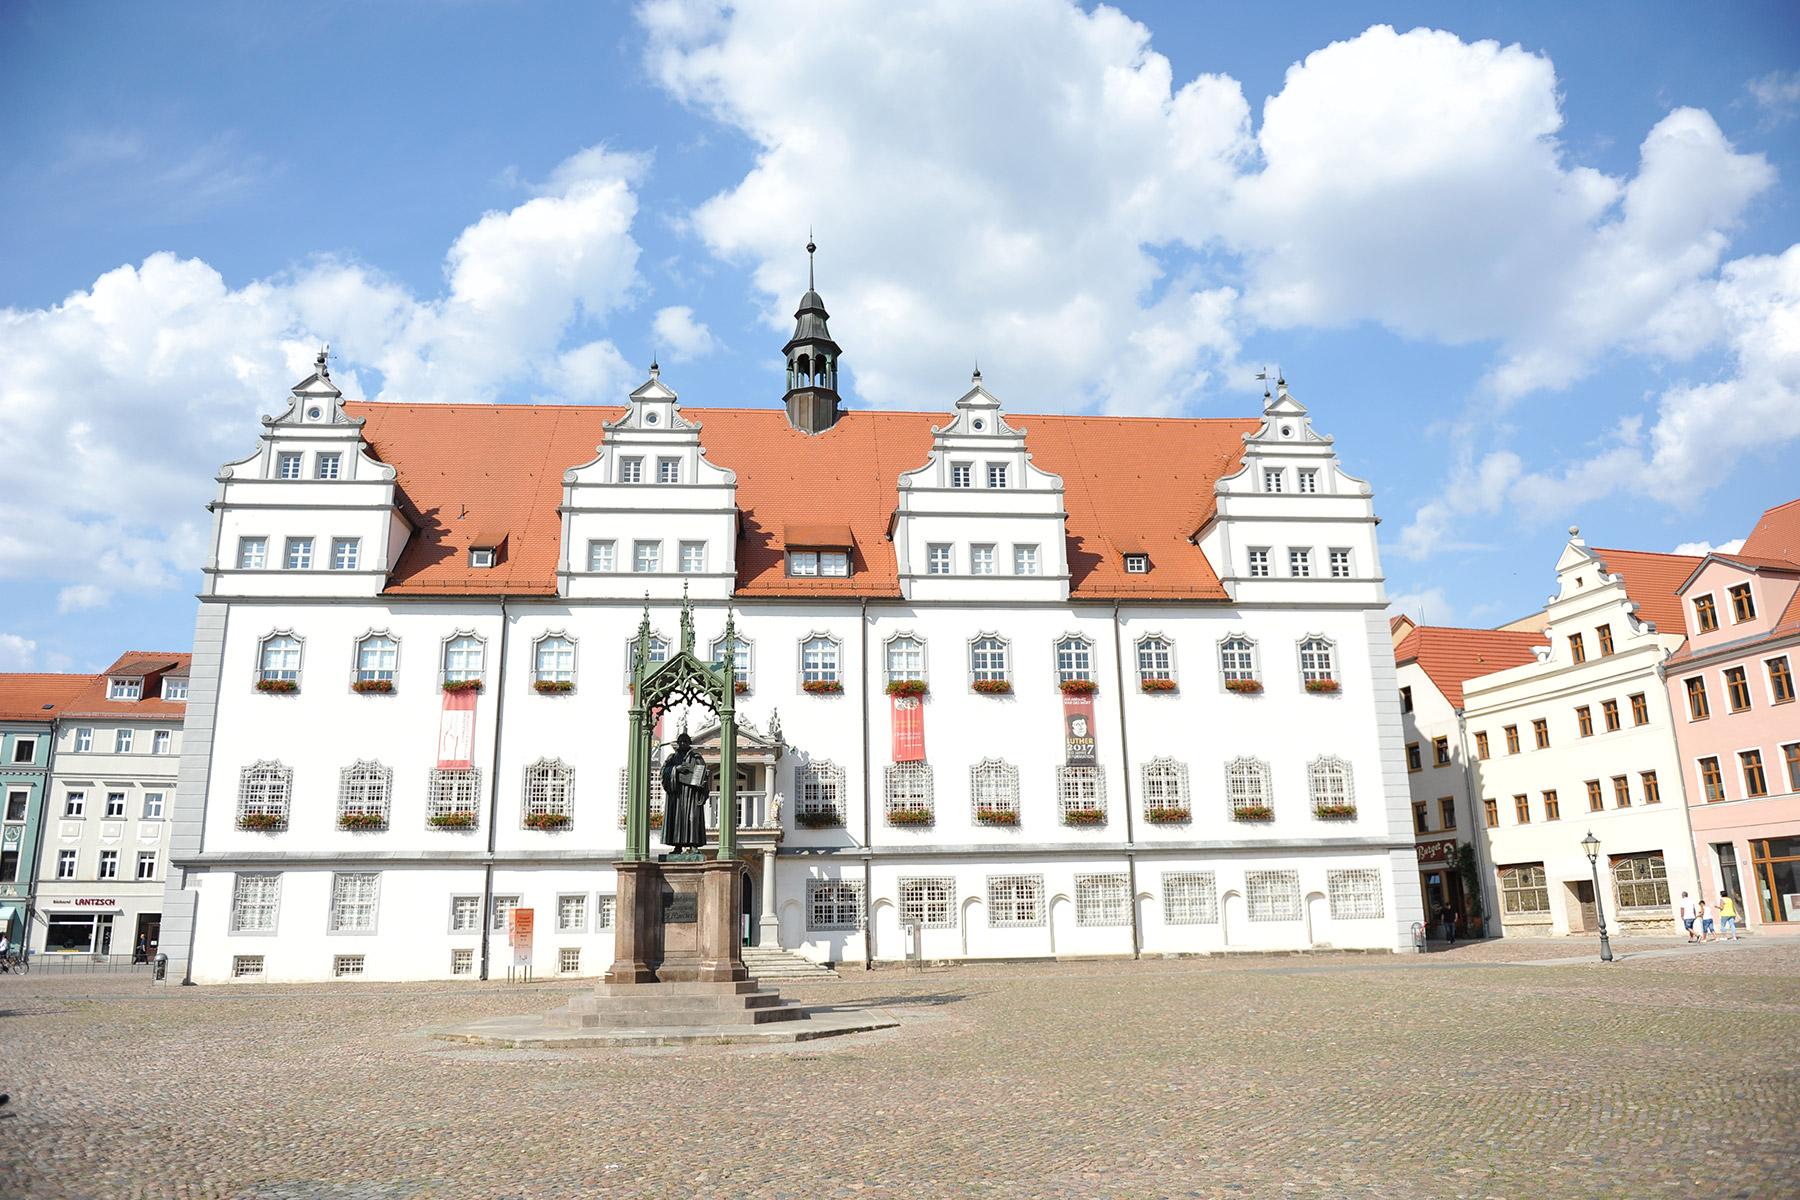 Video lectures used for the current seminar organized by the LWF Center Wittenberg usually begin at one of the familiar places in Lutherâs town. Here is the market place with the statue of Martin Luther. Photo: LWF